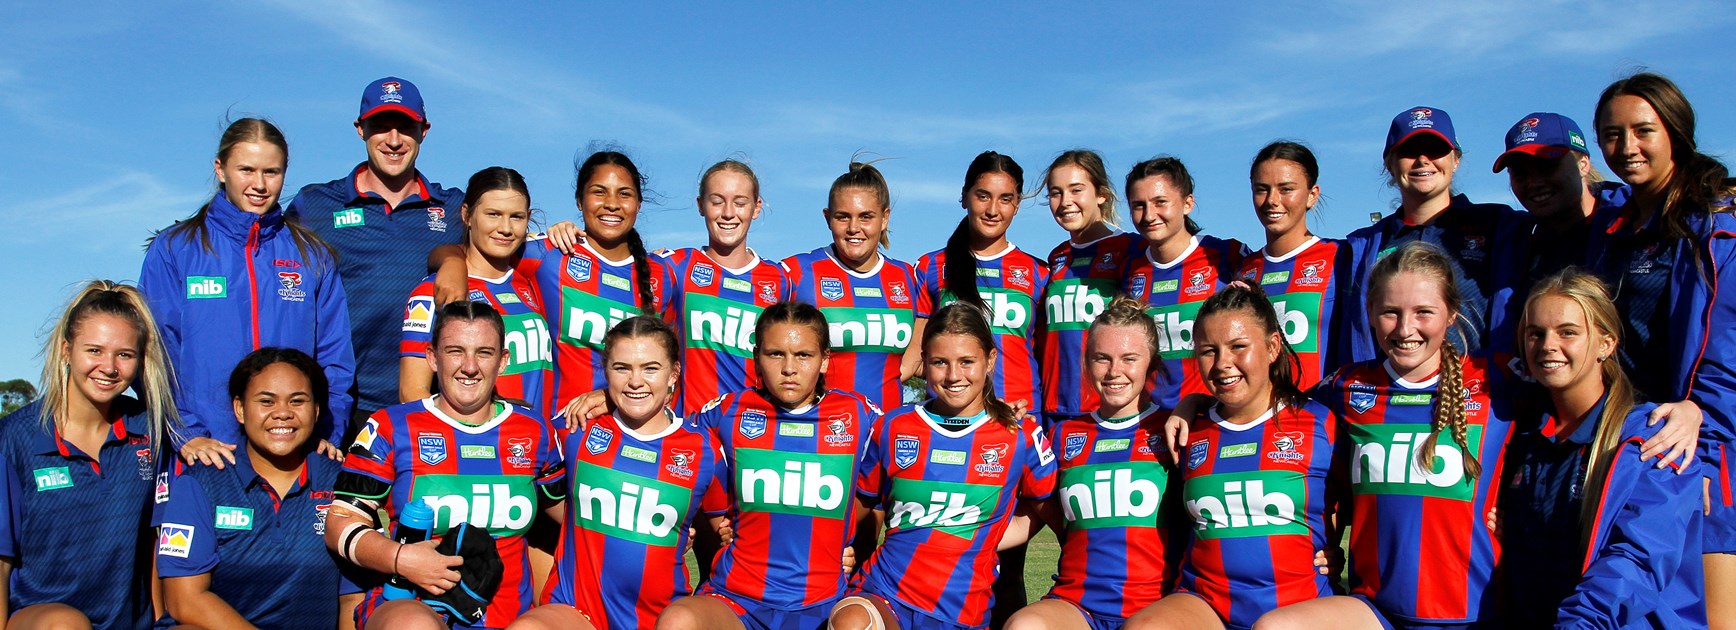 Grand final glory up for grabs in Tarsha Gale Cup